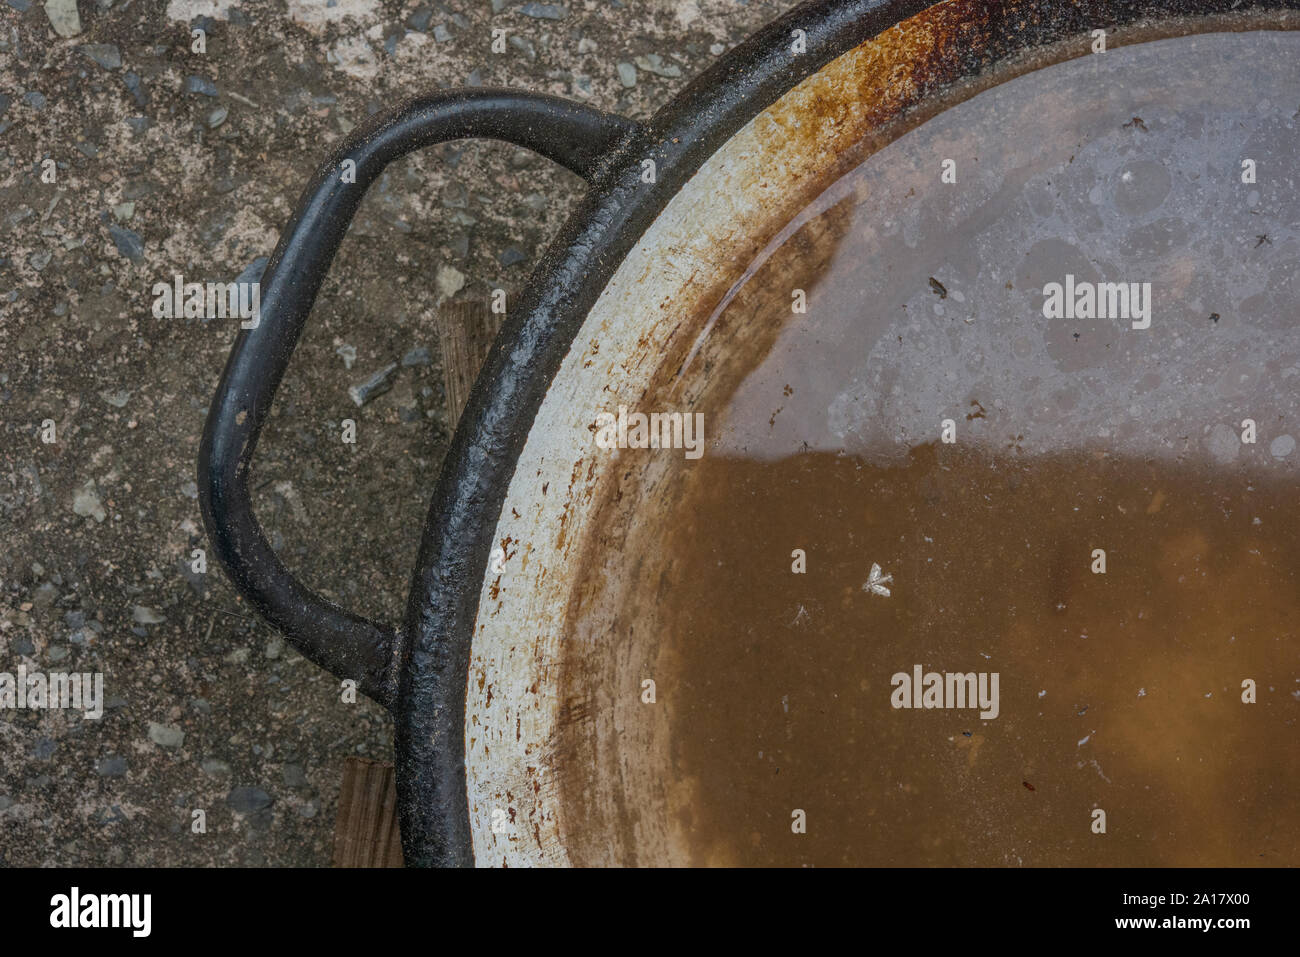 Old iron pan full of dirty standing water Stock Photo